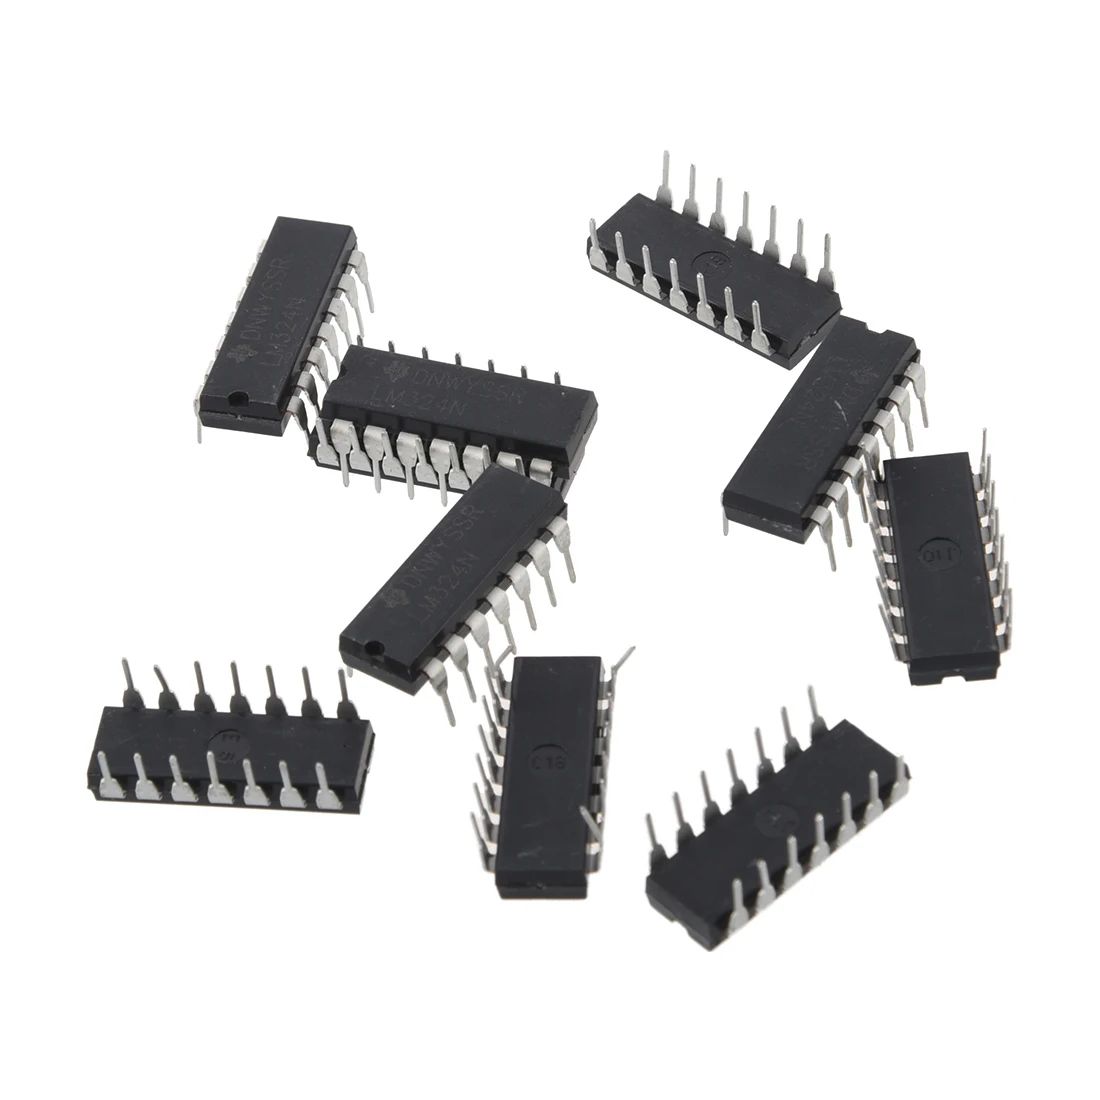 

10 x LM324N Low Power Quad DIP-14 operational amplifier.